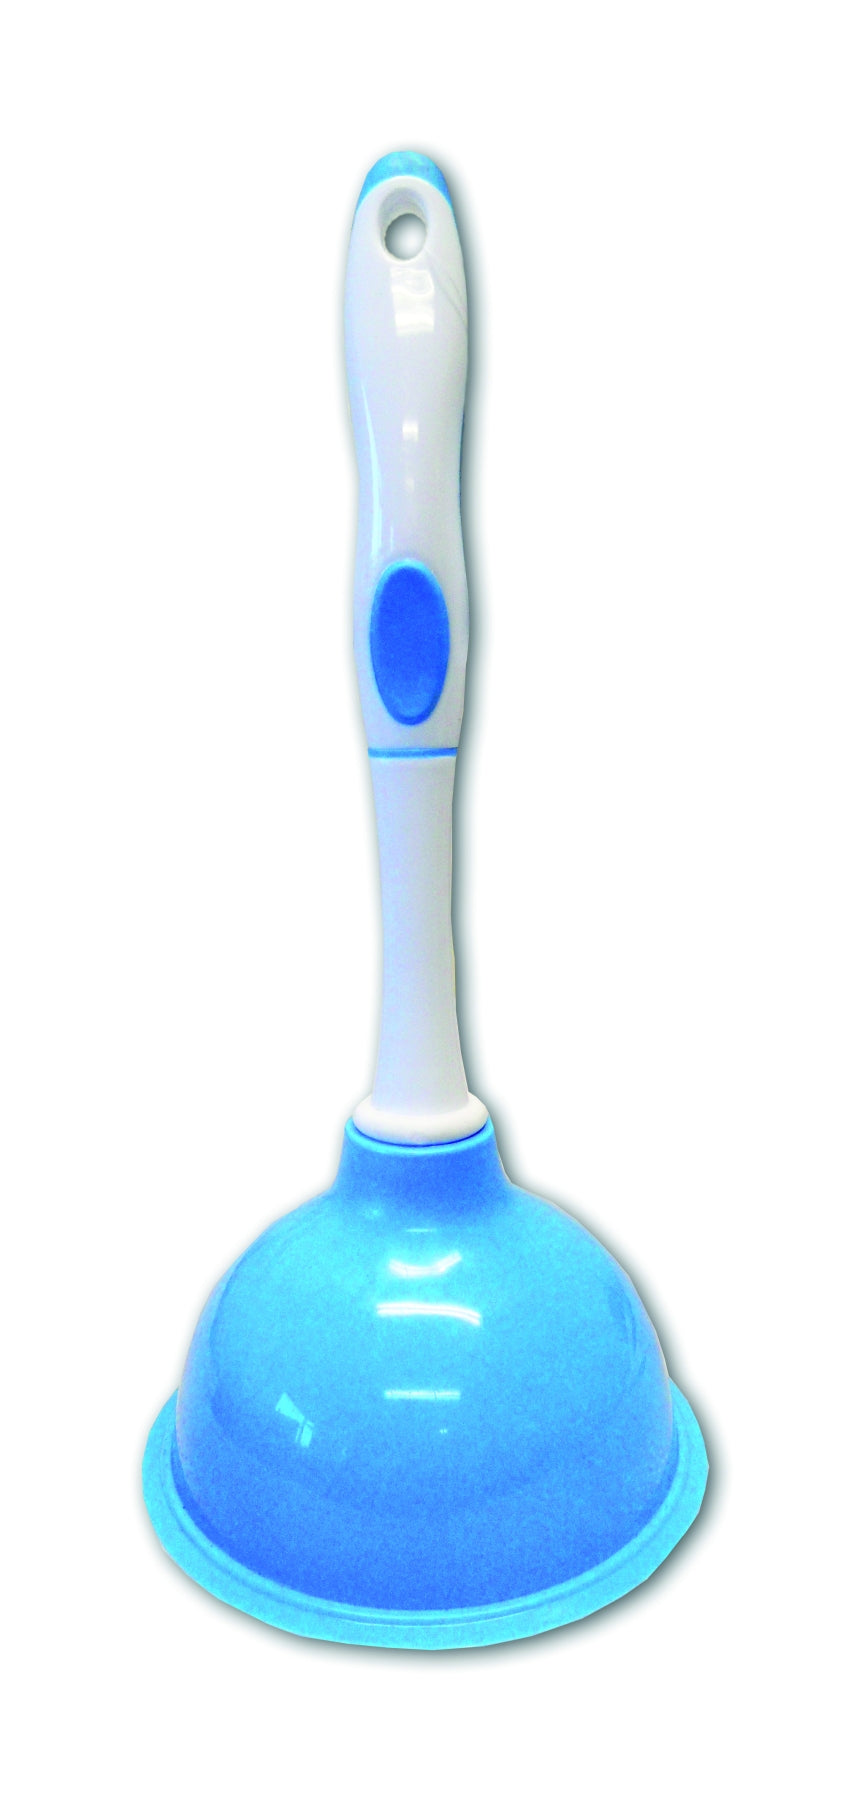 Small Plunger - Blue**